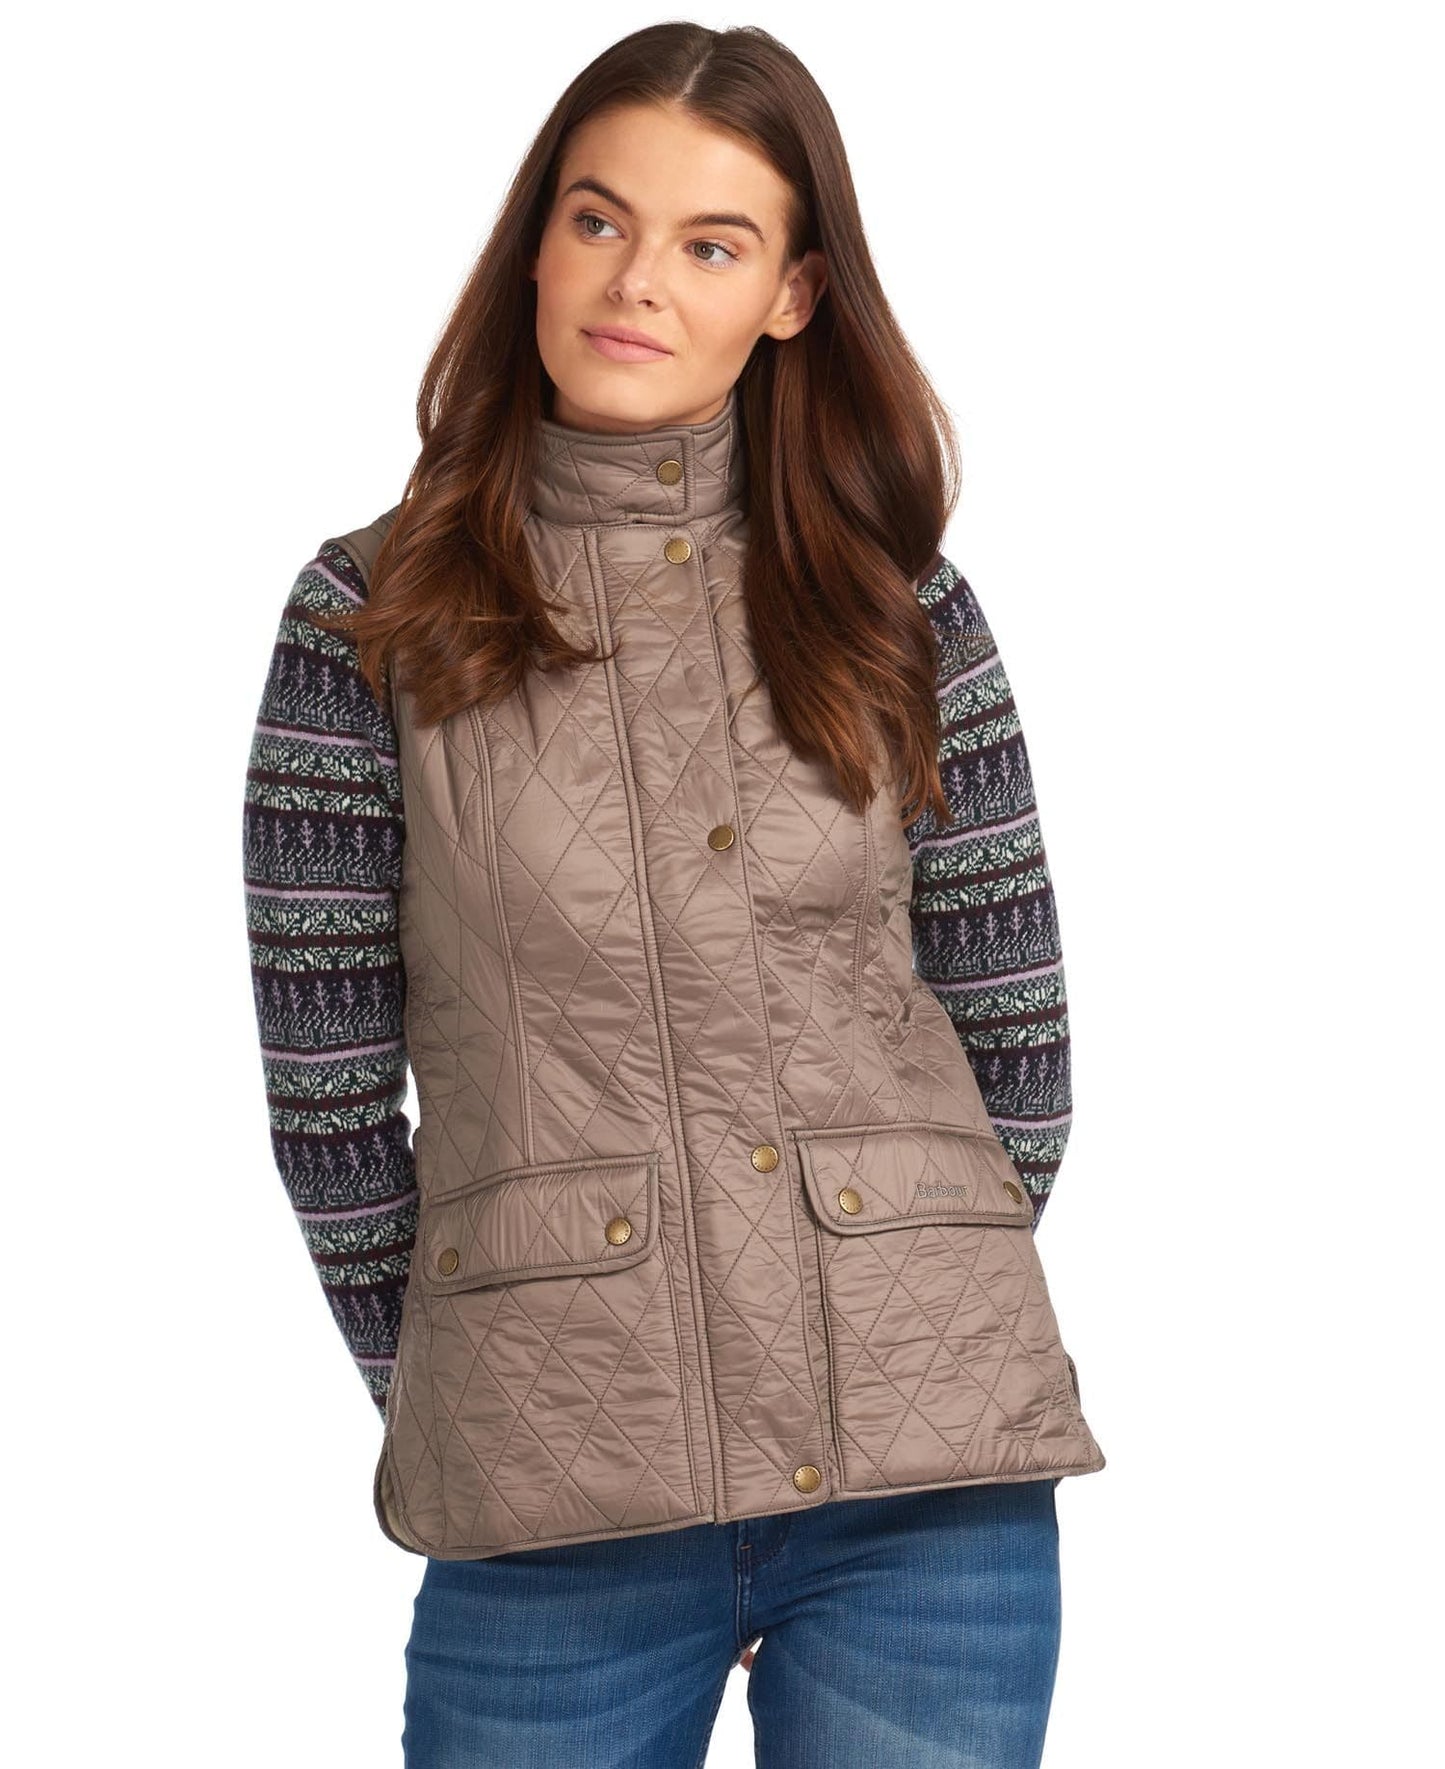 WRAY GILET - TAUPE/PEARL